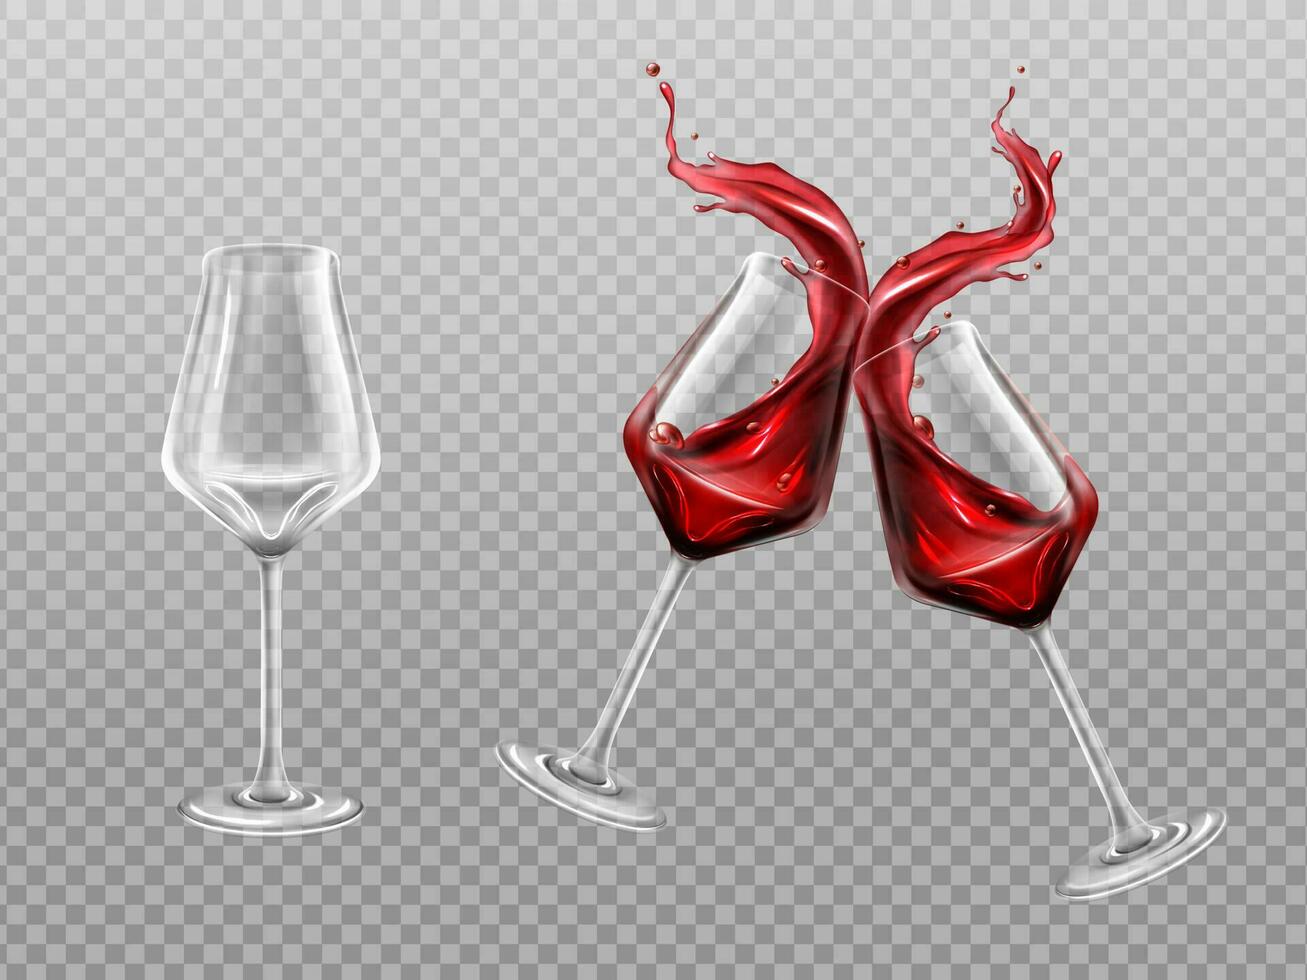 Red wine bottle and glass, alcohol vine drink vector